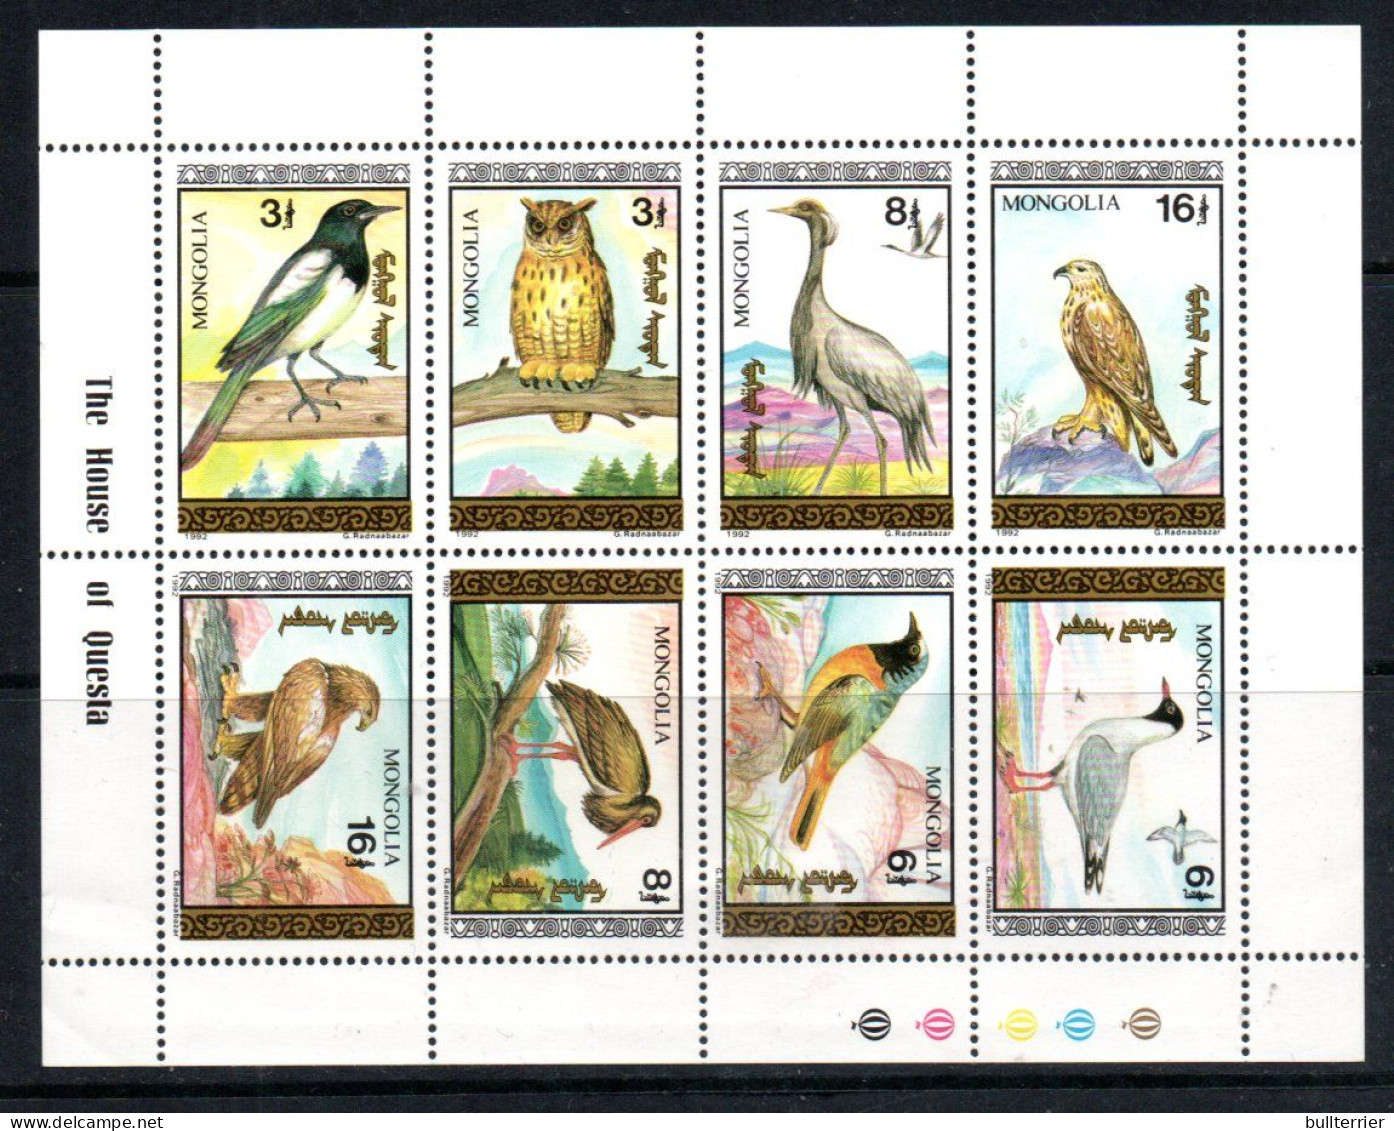 BIRDS - Mongolia- 1992- Birds Sheetlet Of 8 Mint Never Hinged, SG Cat £21.10 - Piccioni & Colombe